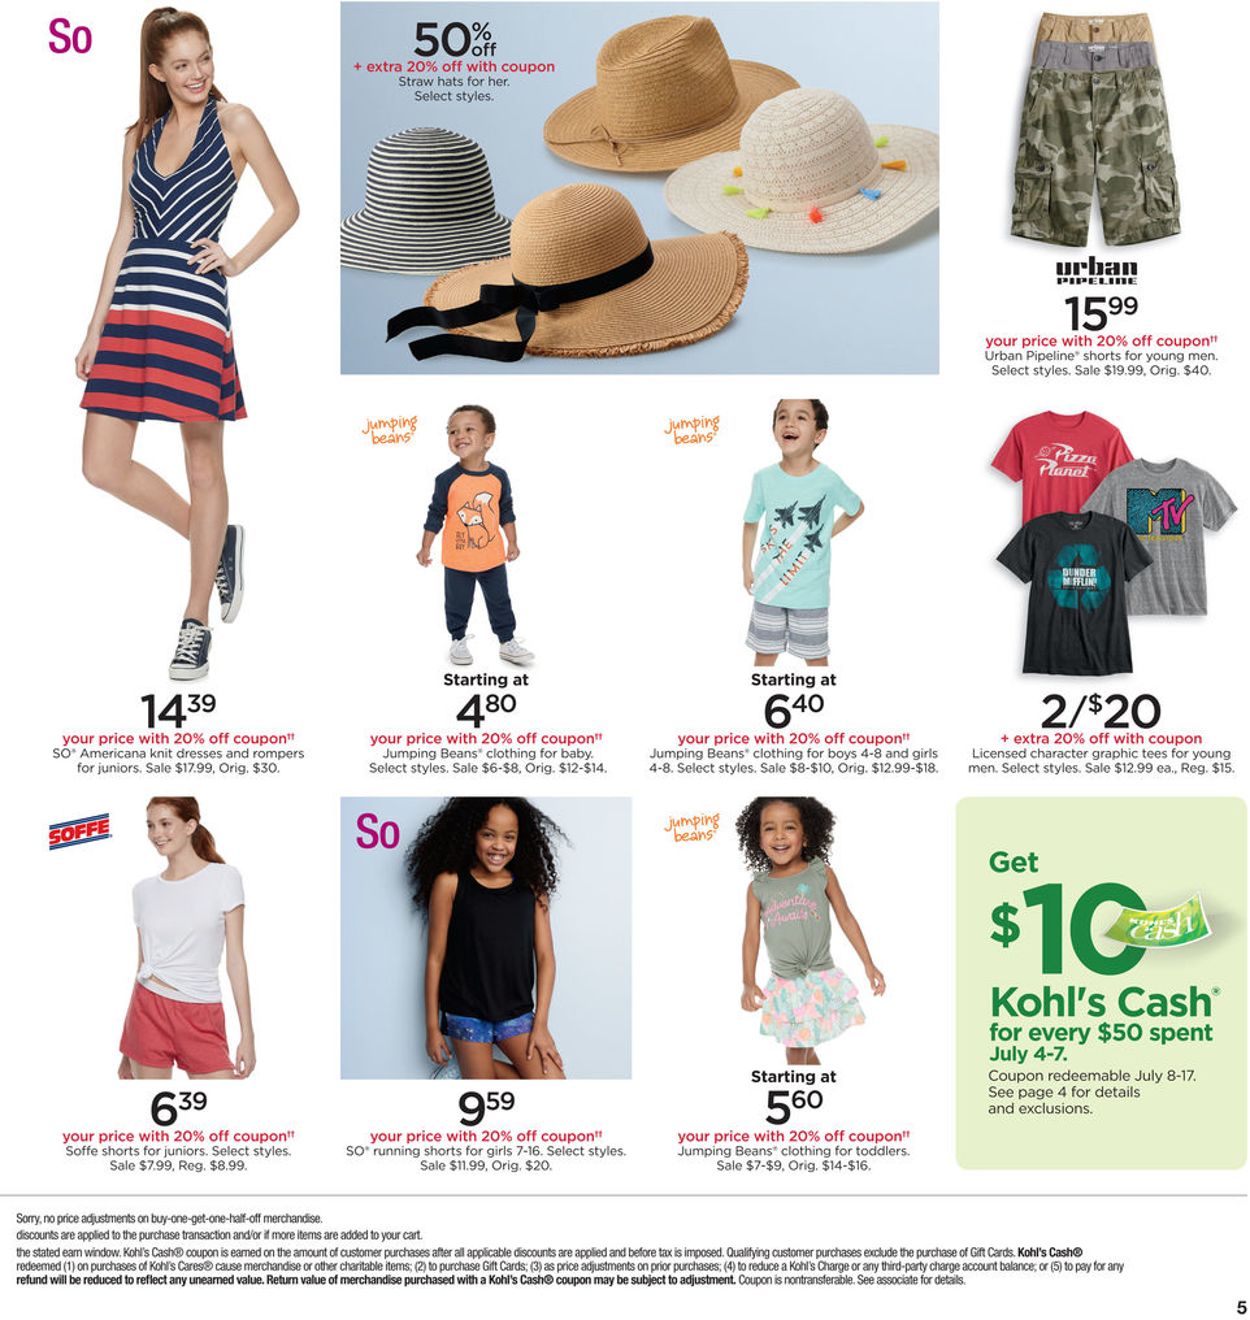 Kohl's Current weekly ad 07/04 - 07/07/2019 [5] - frequent-ads.com